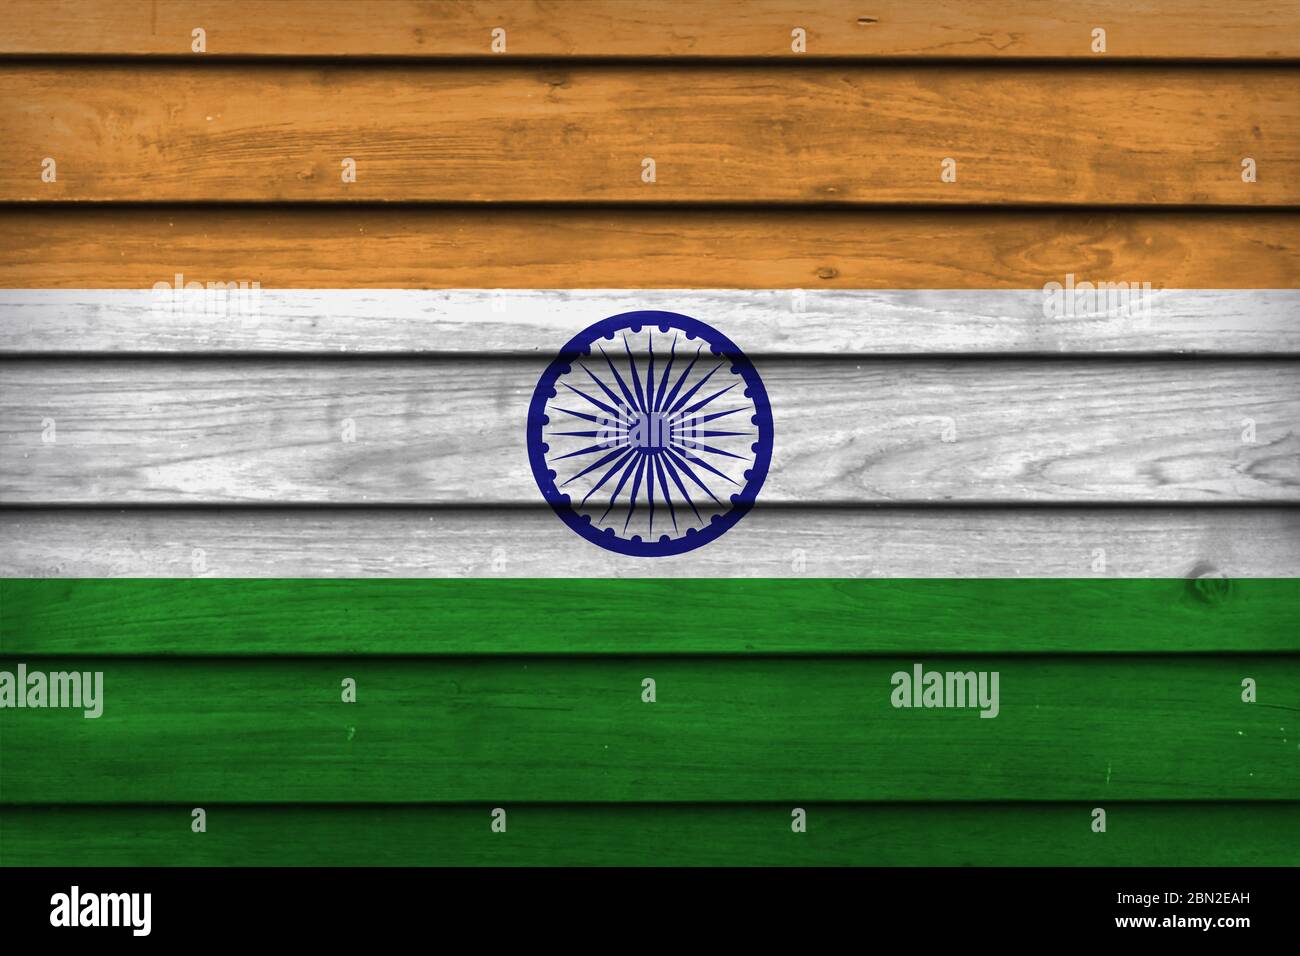 Indian national flag painted on wood background. Stock Photo